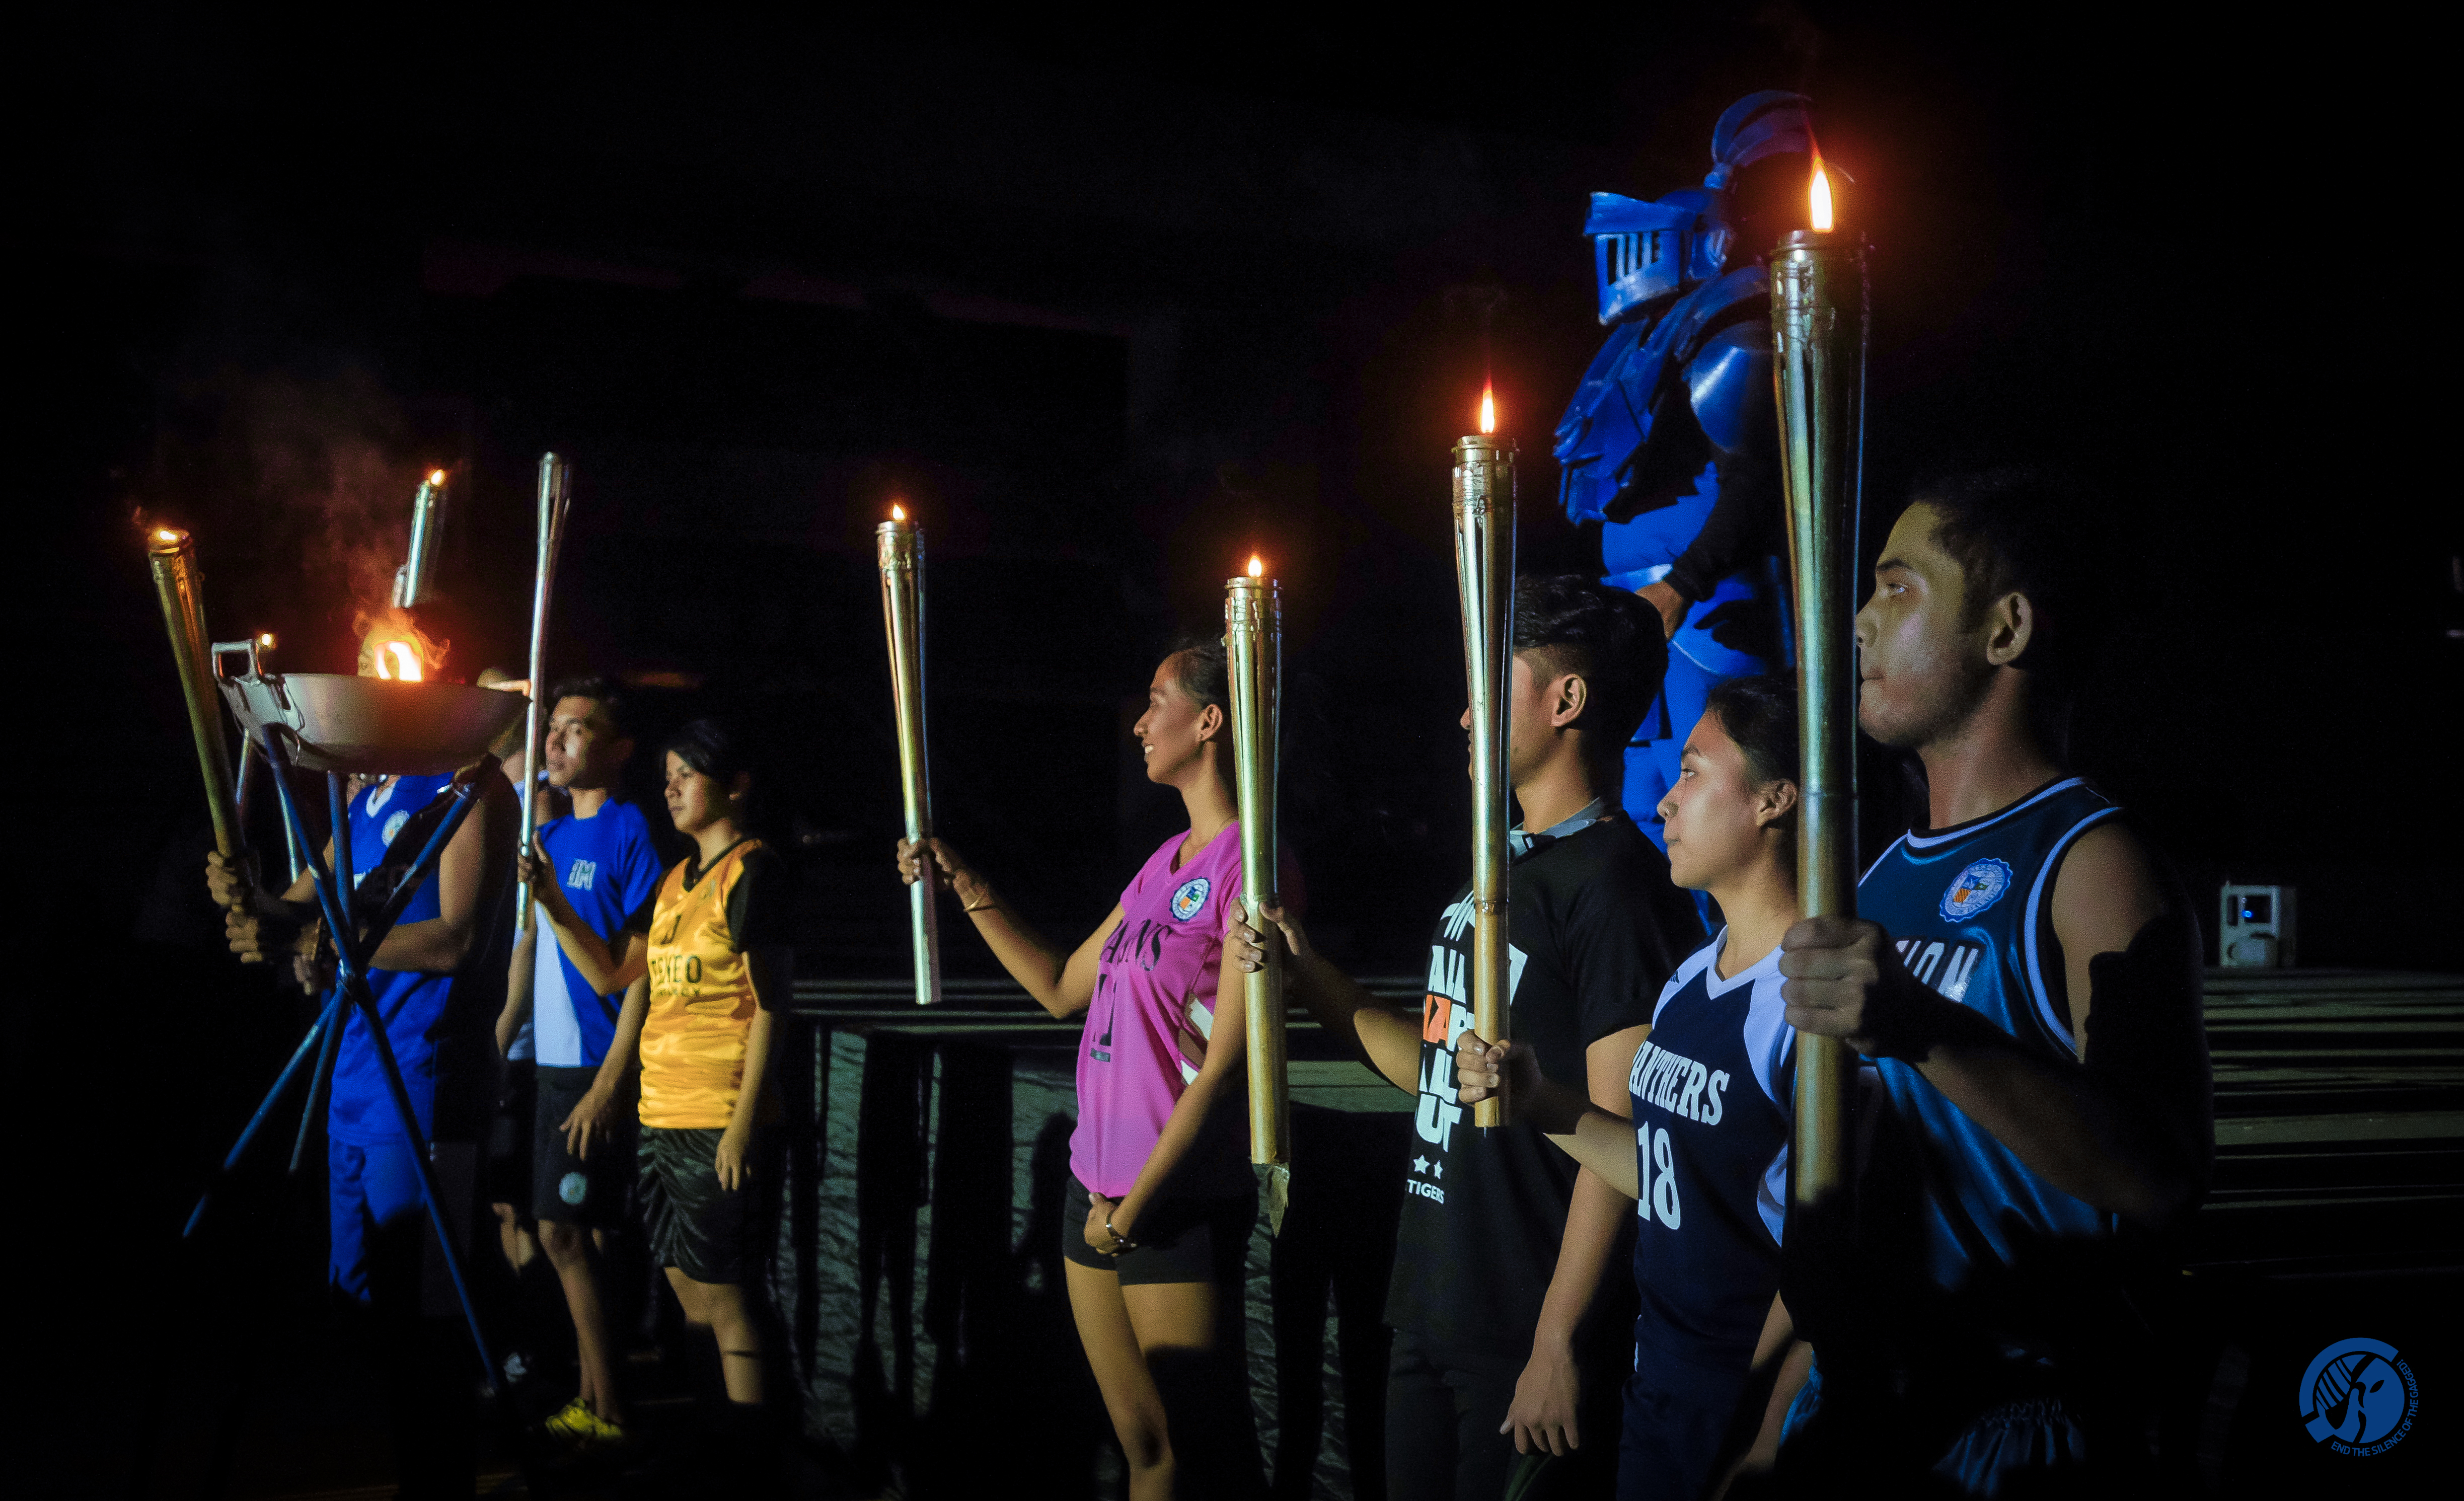 Varsity players from the different sports teams lead the official lighting of the torch. Photo by Alexis Matthew Reyes.